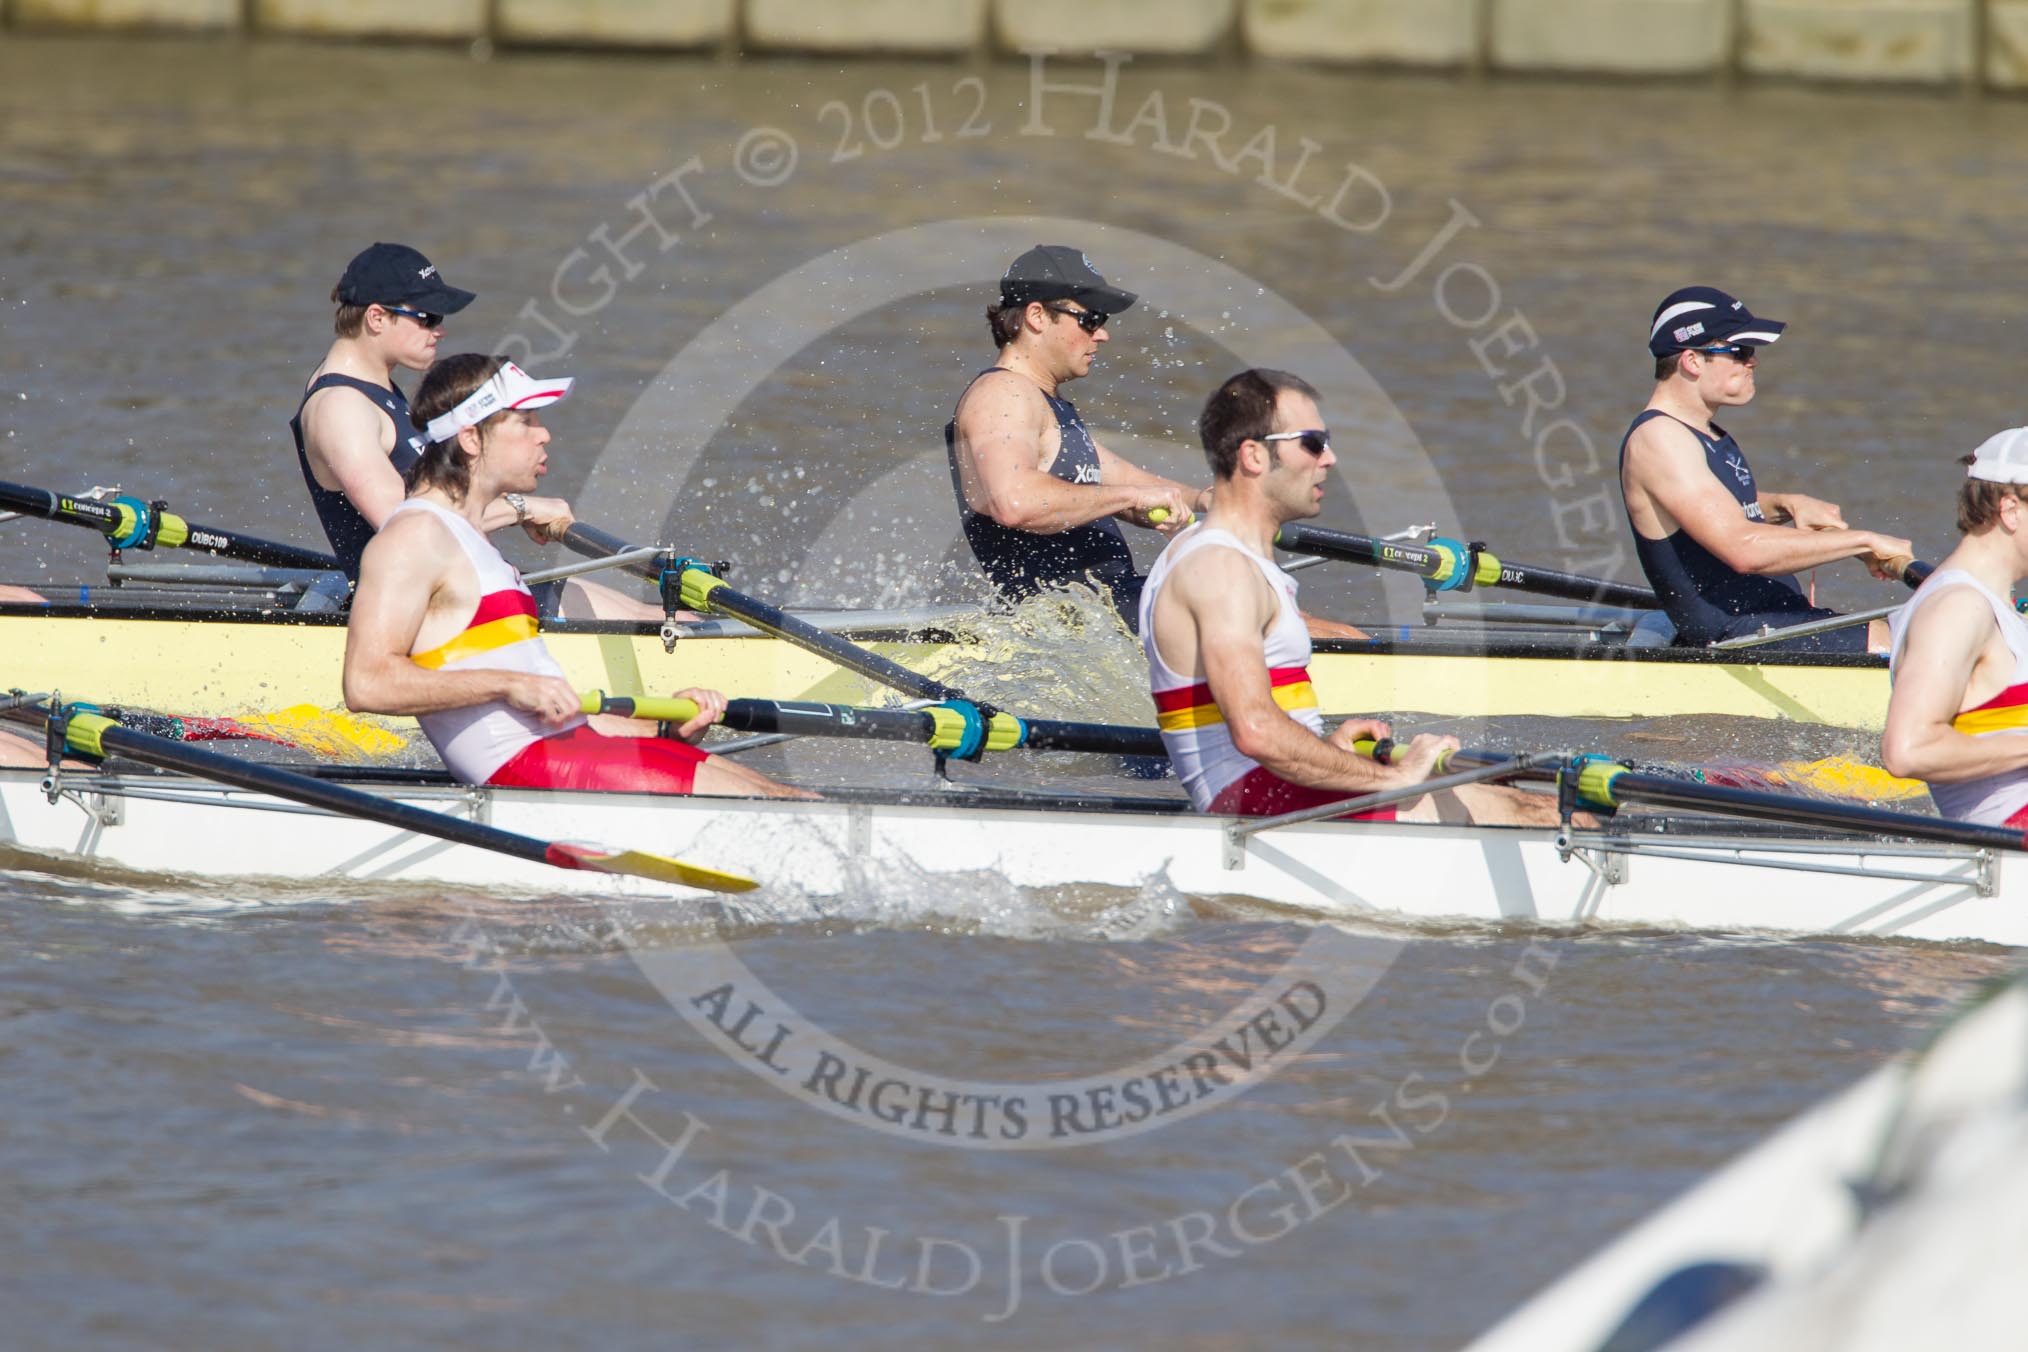 The Boat Race season 2012 - fixture OUBC vs Leander: Tideway Scullers to-be-named 3-seat, to-be-named and to-be-named, in the OUBC Isis boat 6 seat Geordie Macleod, 7 Justin Webb, and stroke Tom Watson..




on 24 March 2012 at 14:01, image #72